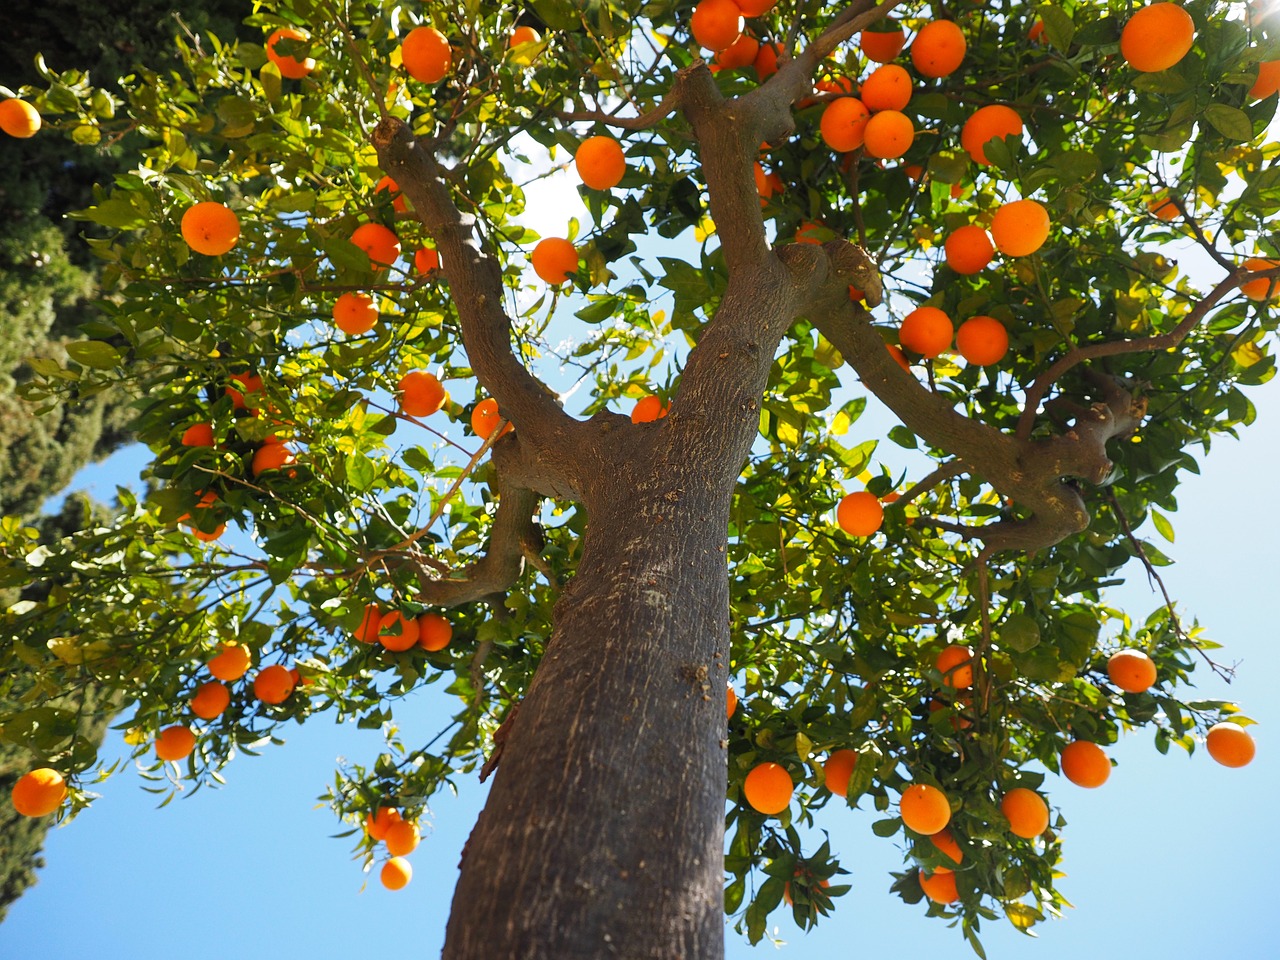 The most frequent pests in orange trees with scale insects and aphids